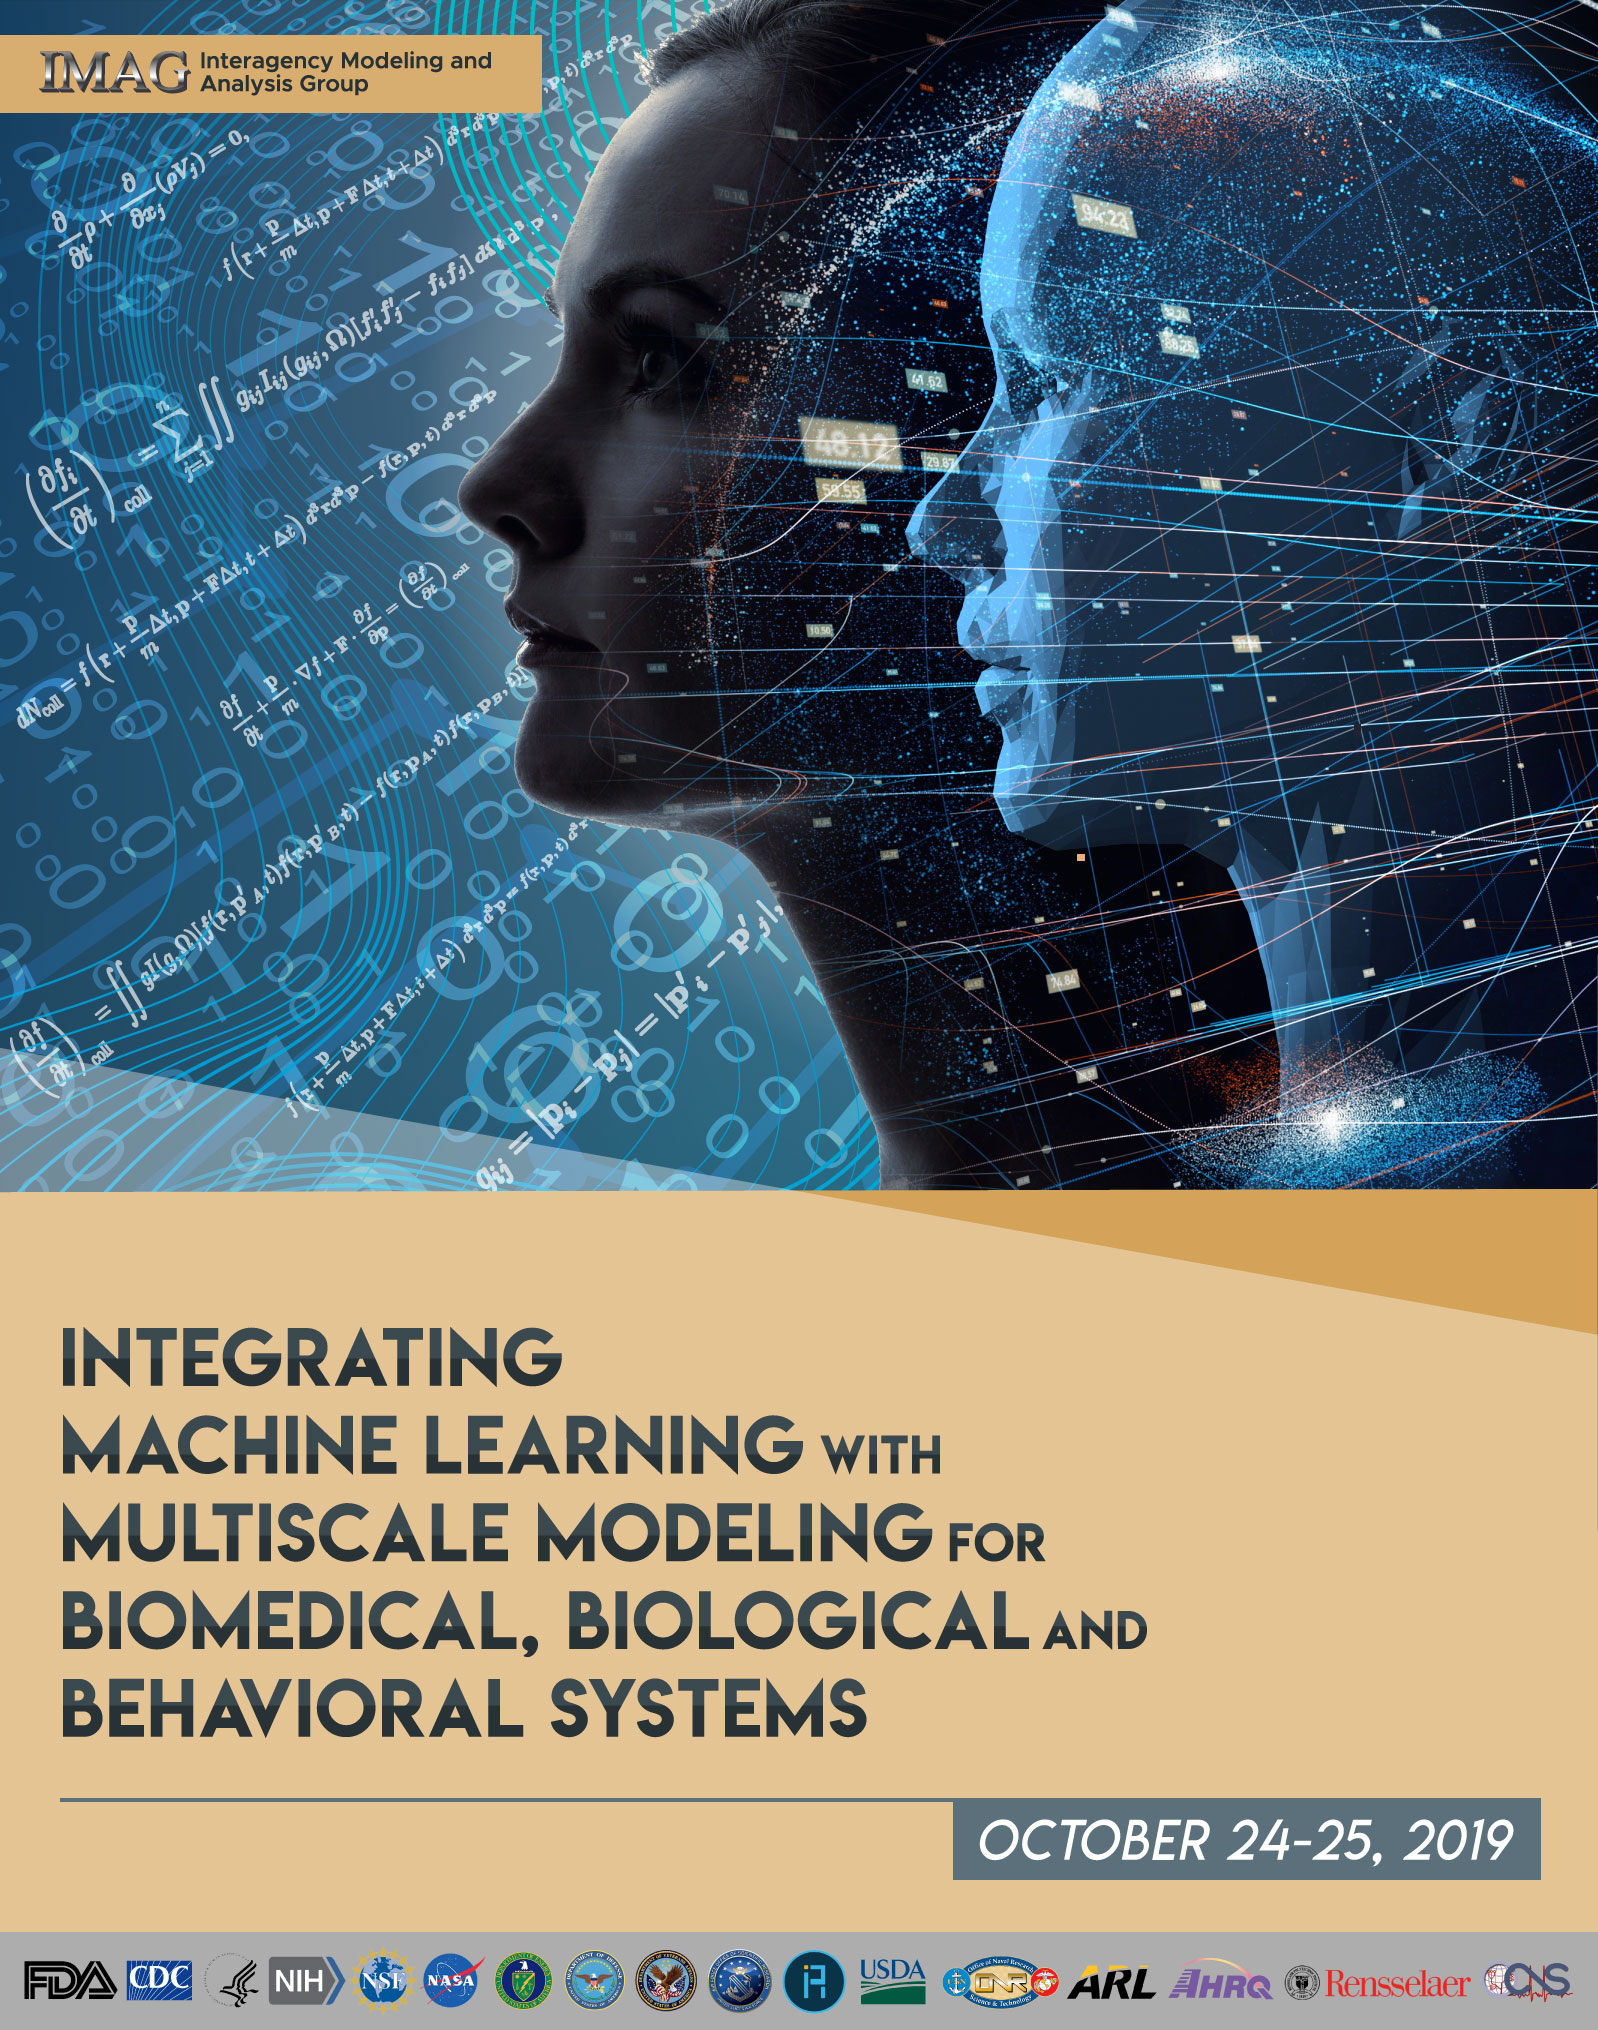 poster of Integrating Machine Learning event